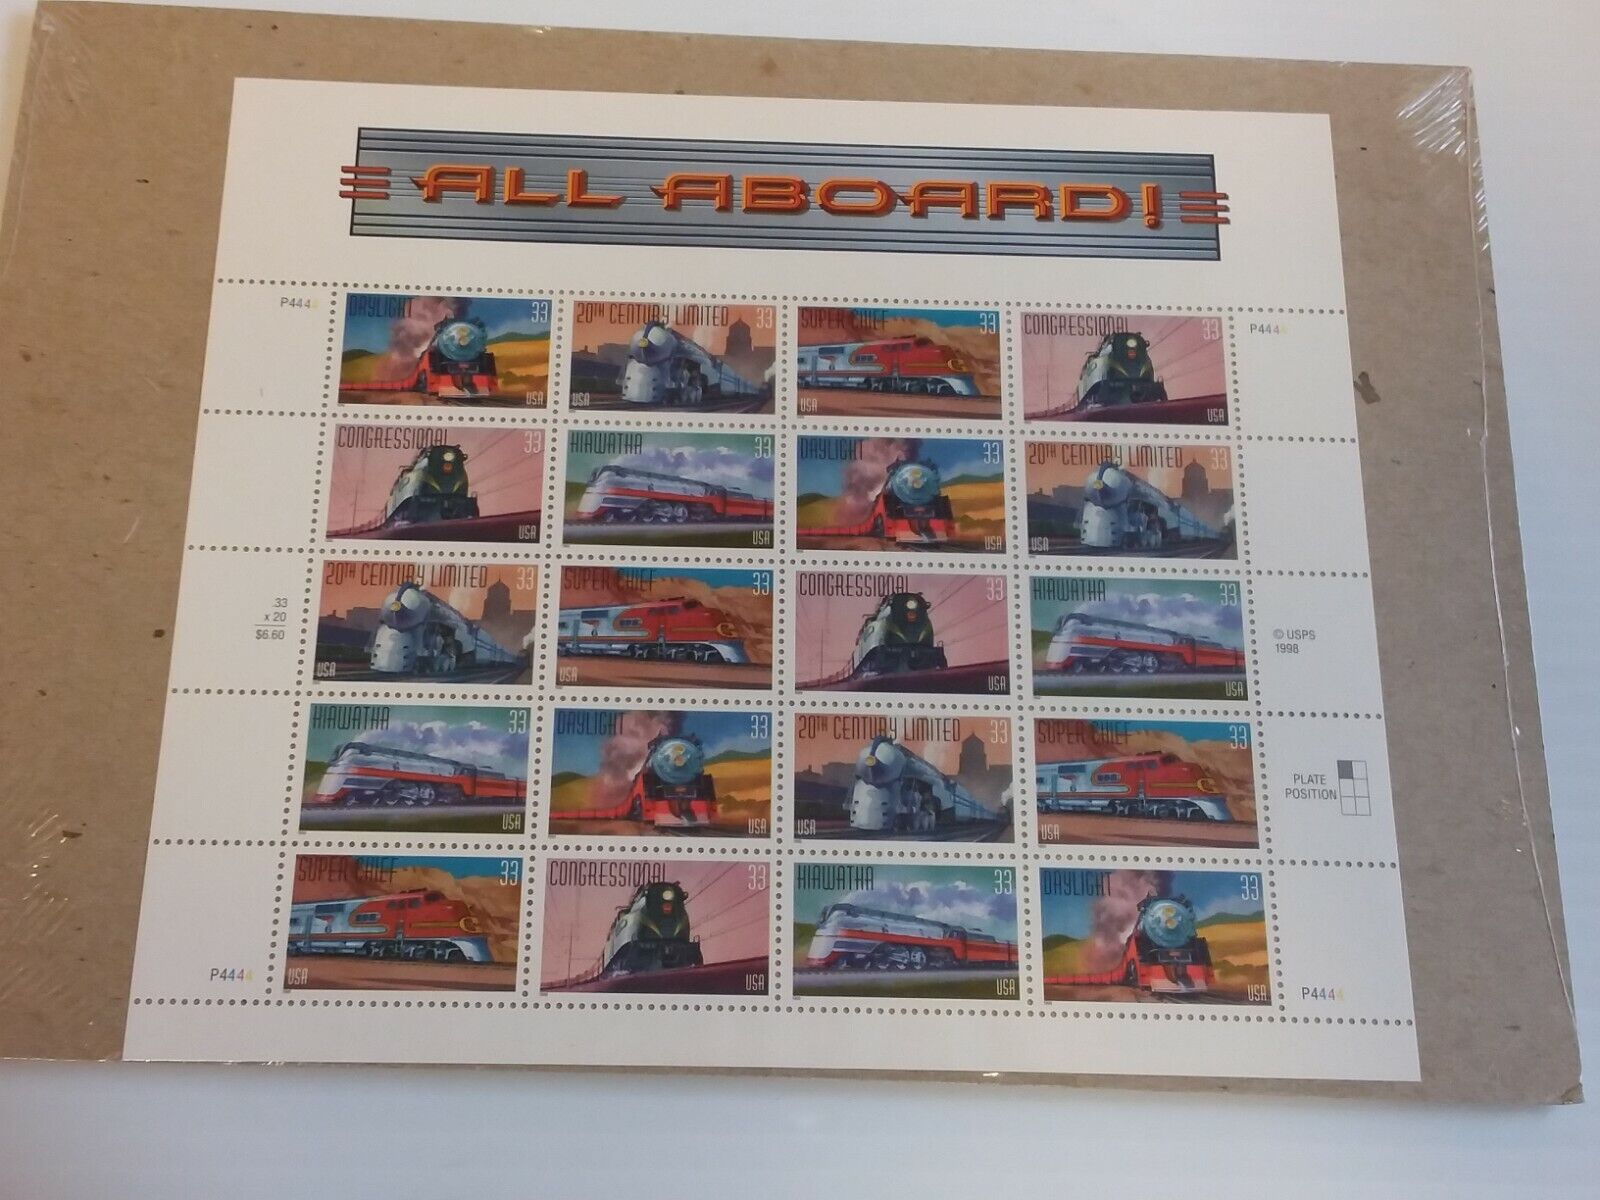 US Postage Stamp Collection: Full Page, Posted FIrst Day Issue, Inverted Centers Без бренда - фотография #4